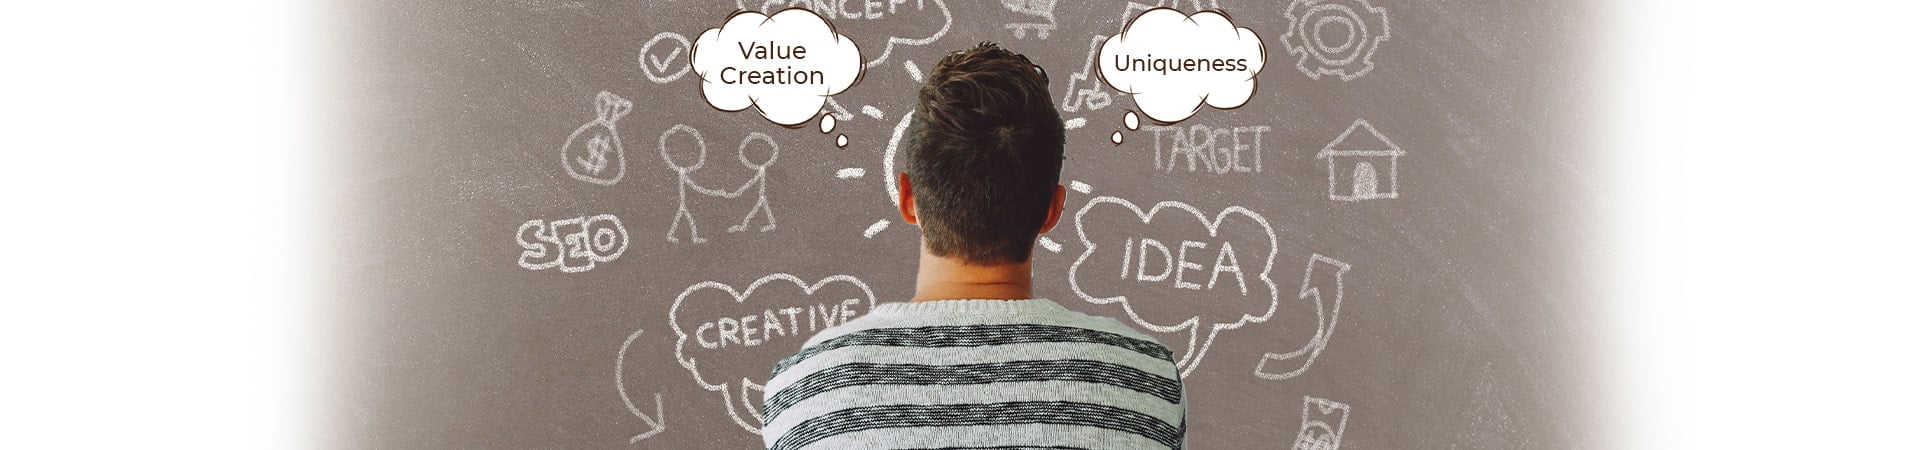 ‘Uniqueness’ or ‘Value Creation’ – Which is more relevant to Grow?